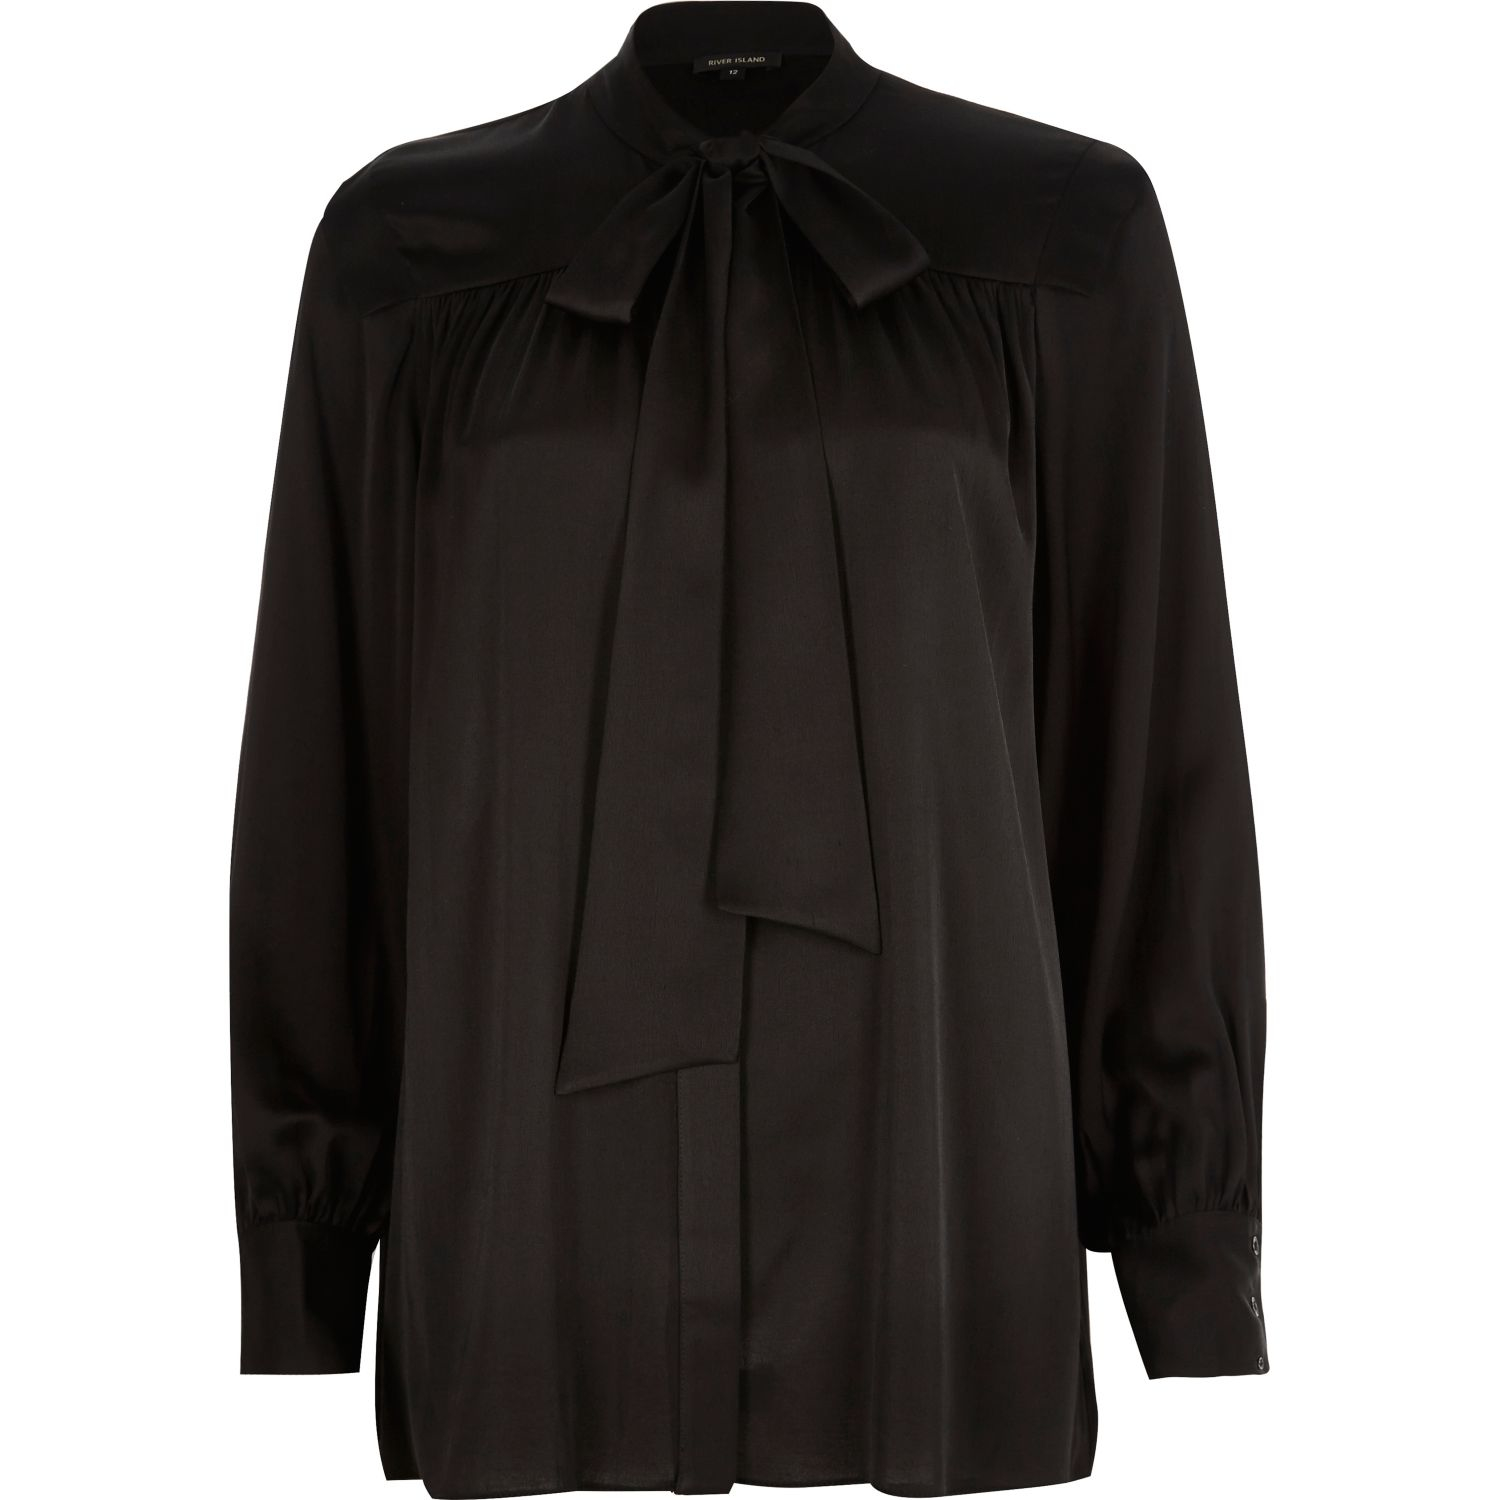 River Island Black Pussybow Neck Blouse - Lyst